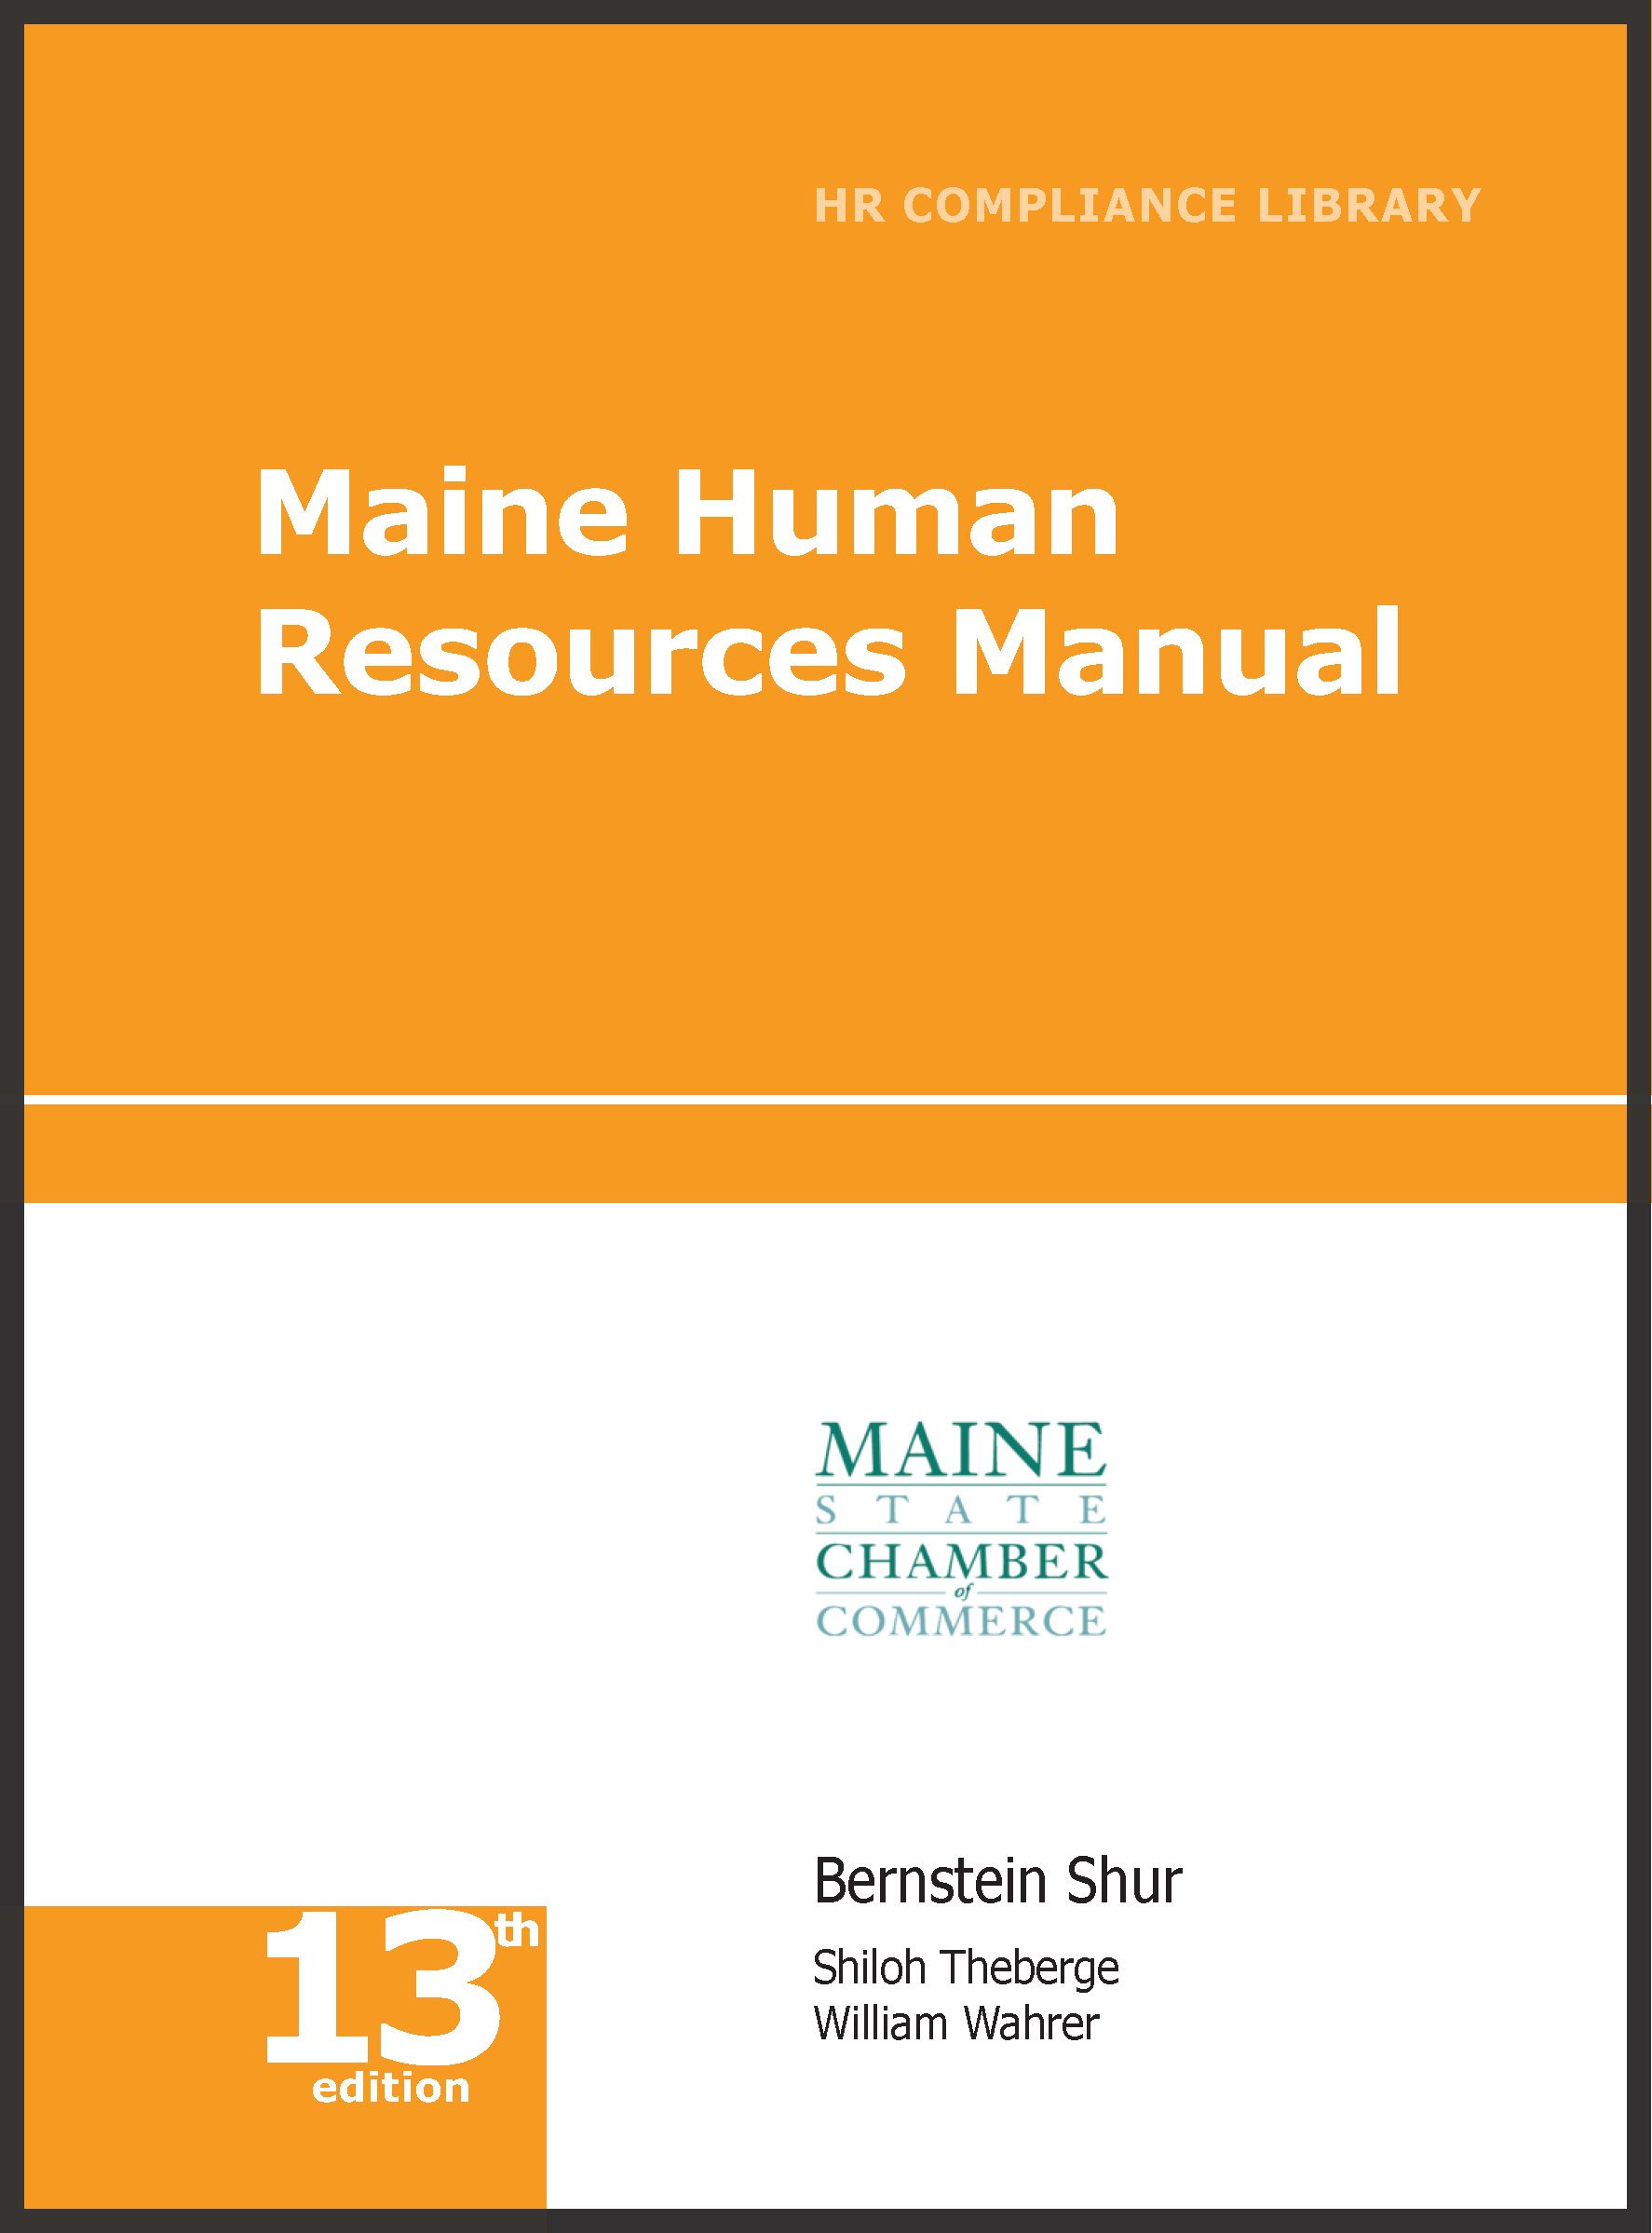 Maine Human Resources Library—Online Only employment law image, remote work, labor laws, employment laws, right to work, order of protection, minimum wage